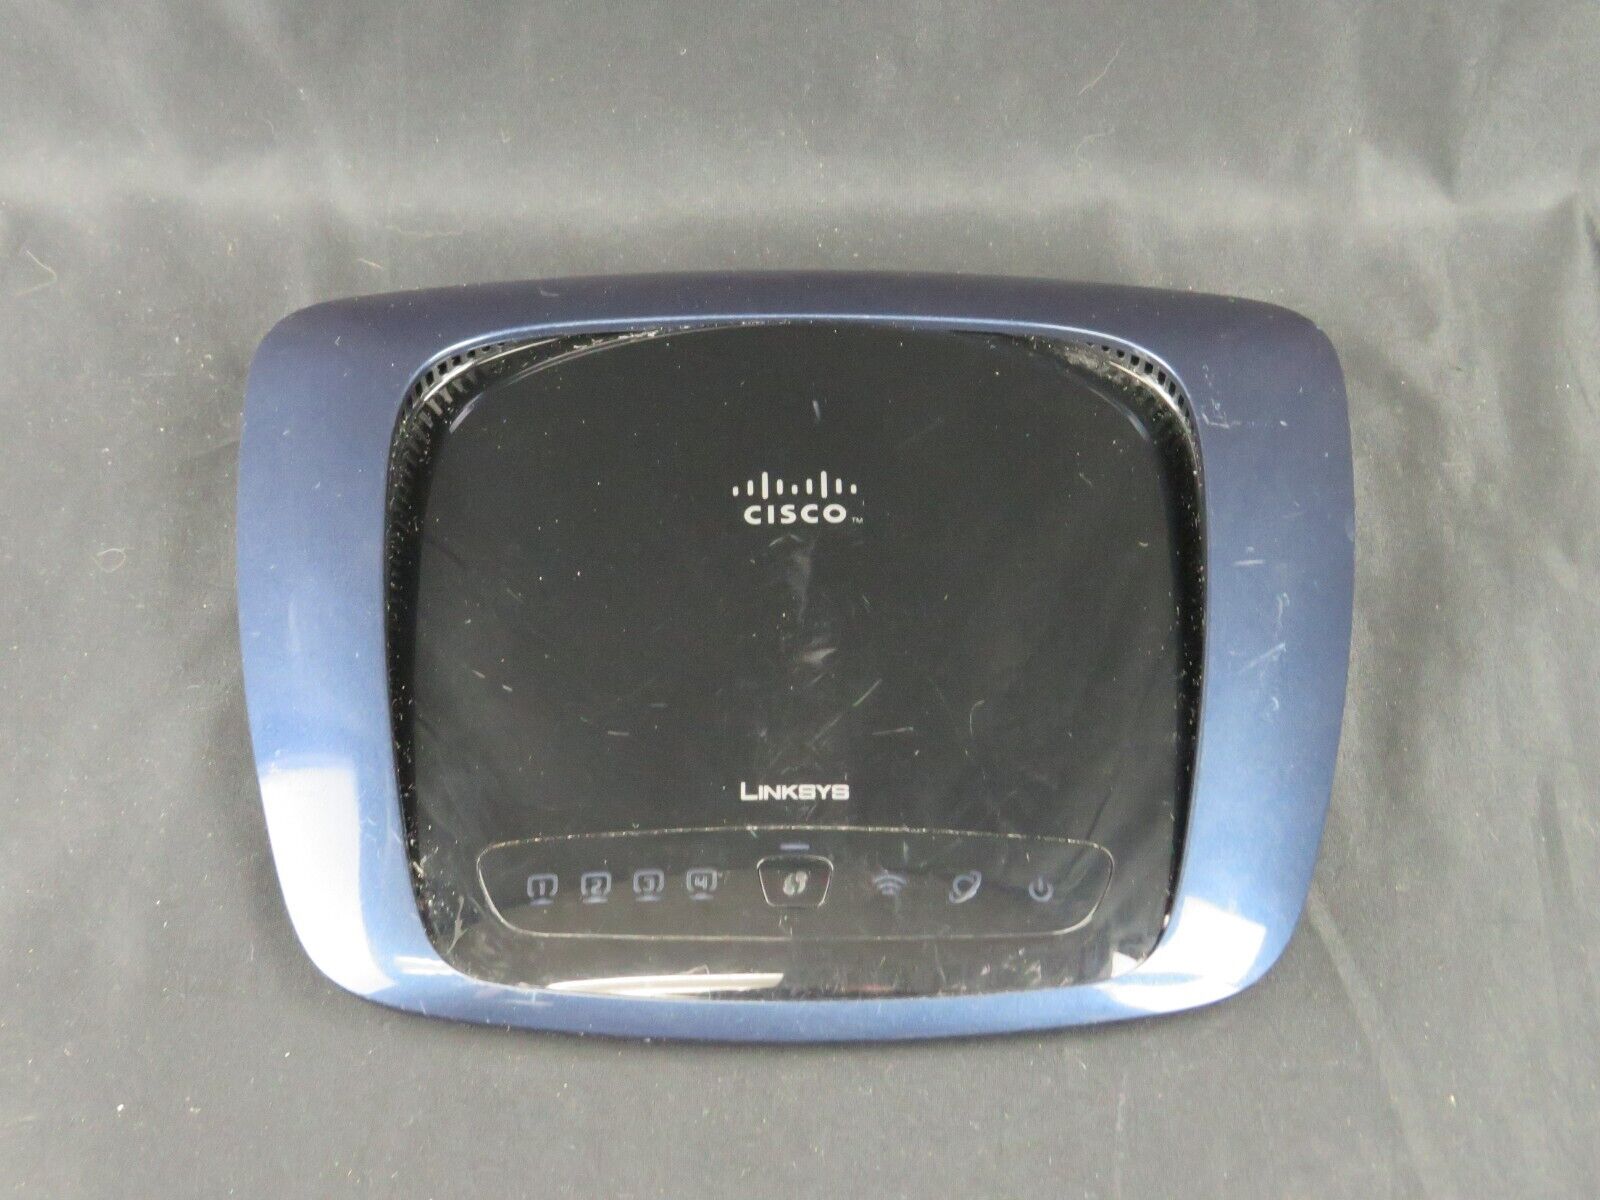 Linksys Wireless Router WRT400N 300 Mbps 4-Port 10/100 